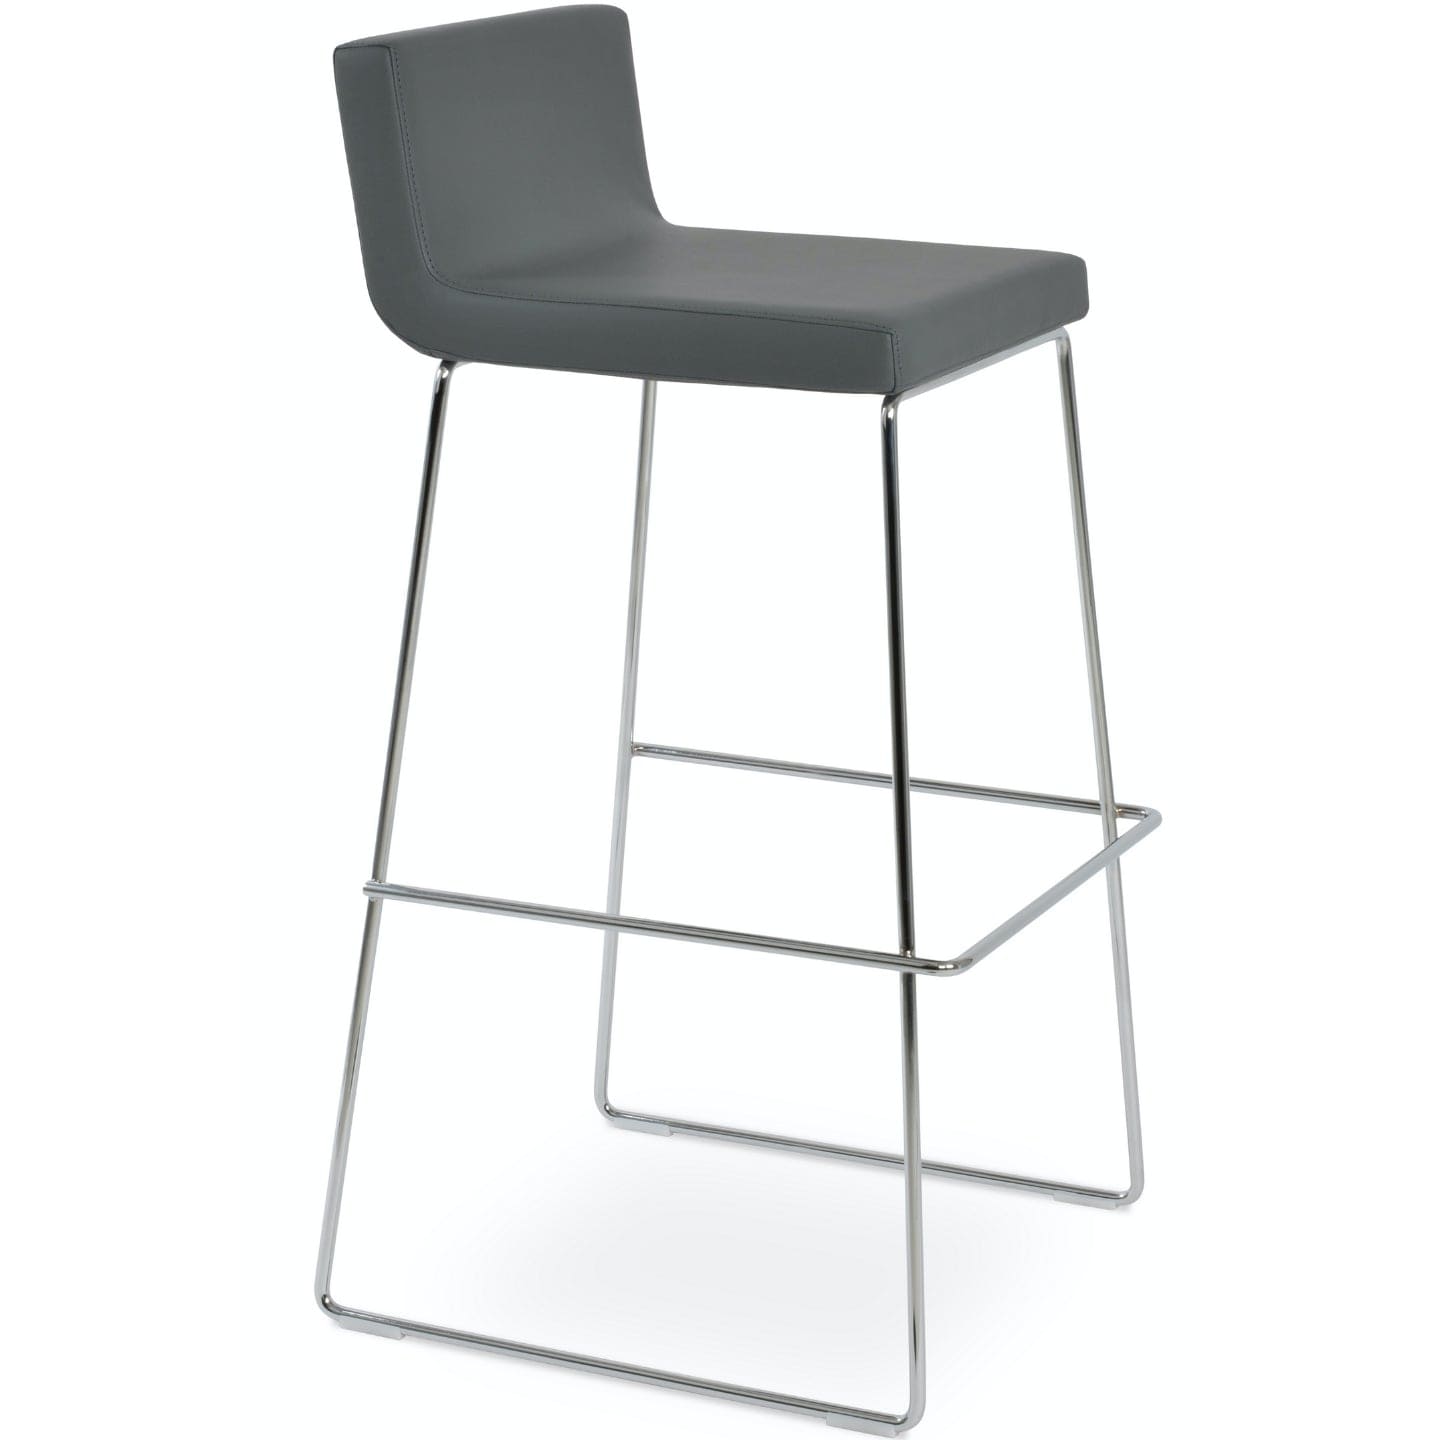 Soho Concept dallas-wire-handle-back-metal-wire-base-leatherette-seat-kitchen-stool-in-grey